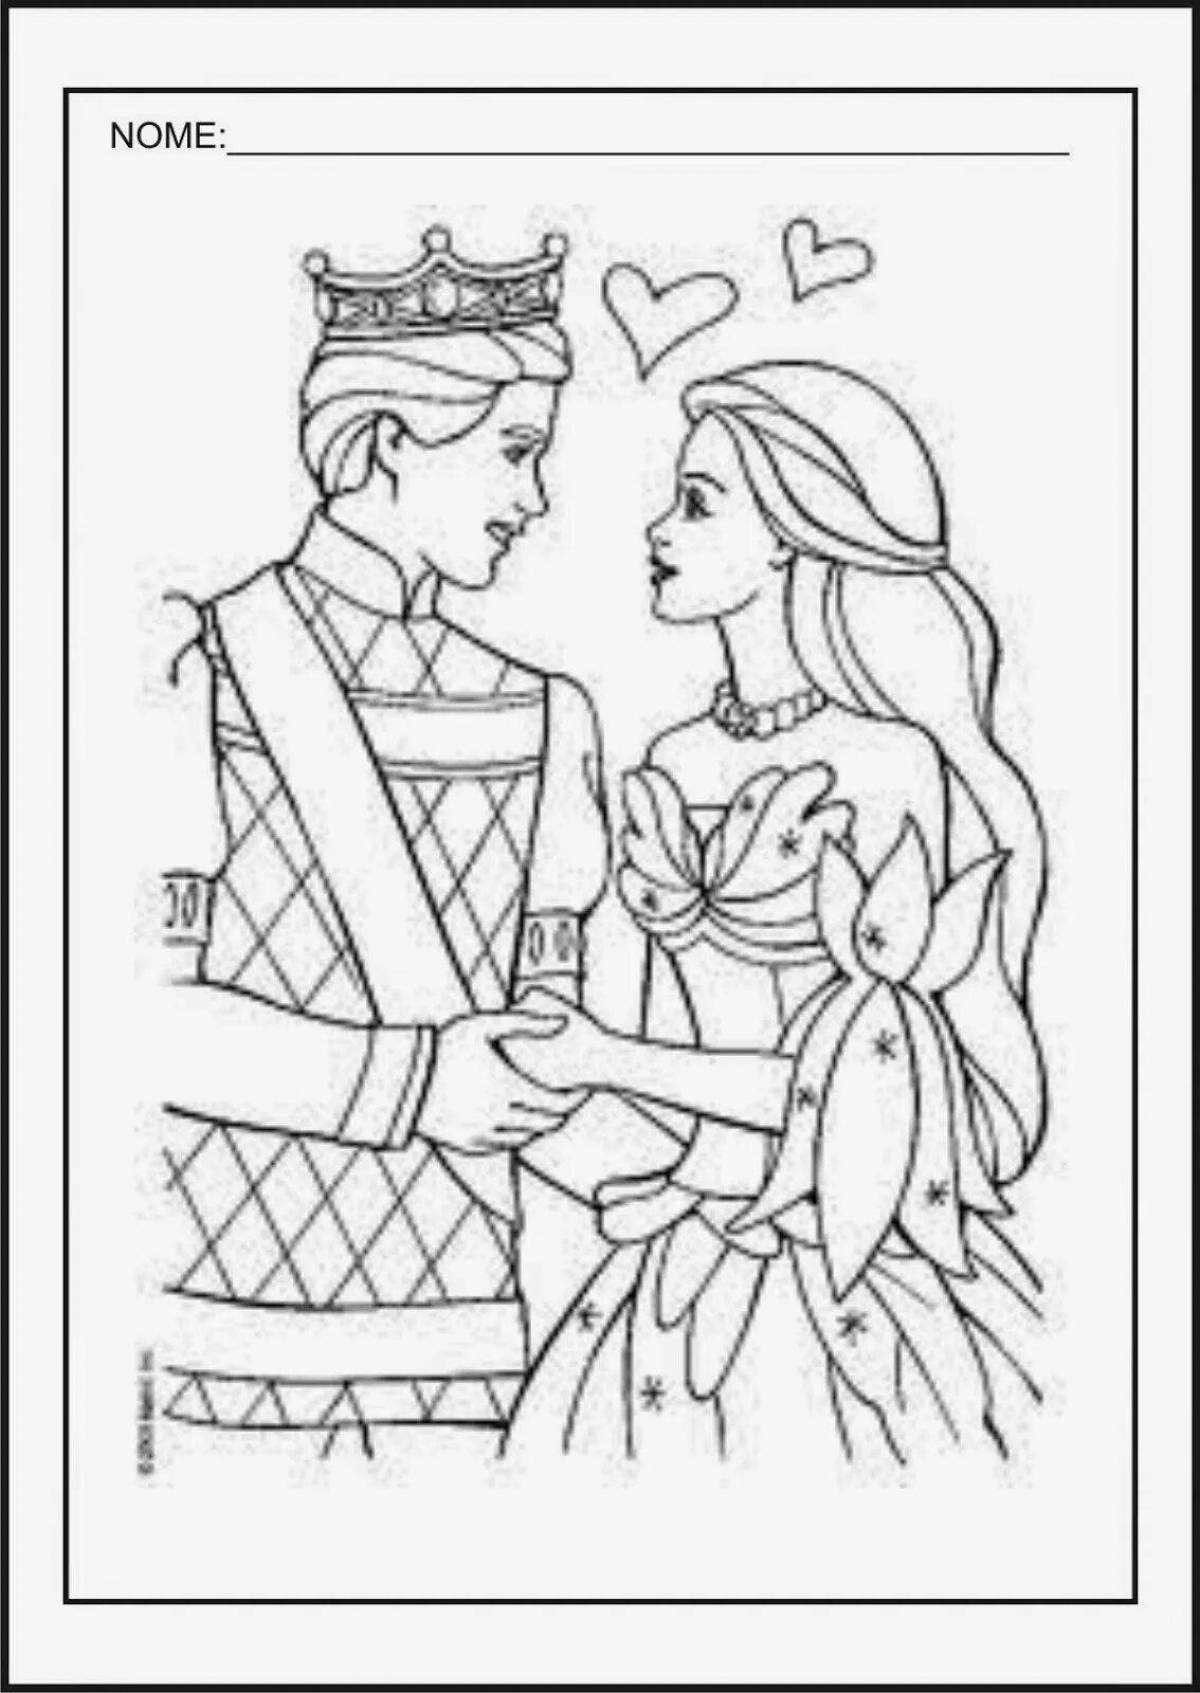 Charming queen barbie coloring book